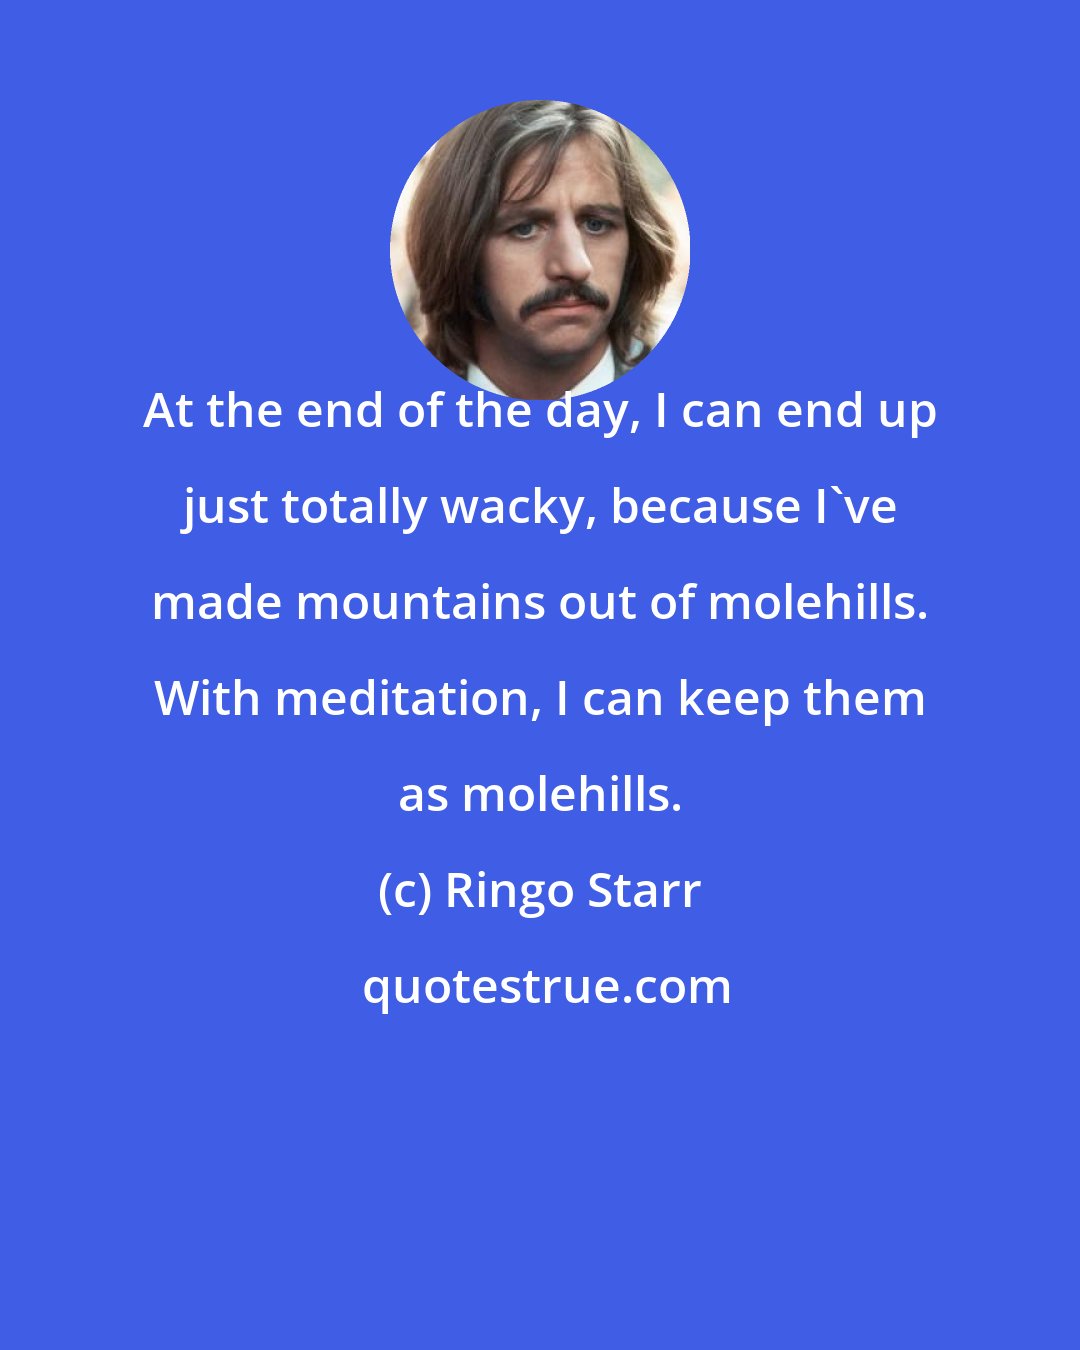 Ringo Starr: At the end of the day, I can end up just totally wacky, because I've made mountains out of molehills. With meditation, I can keep them as molehills.